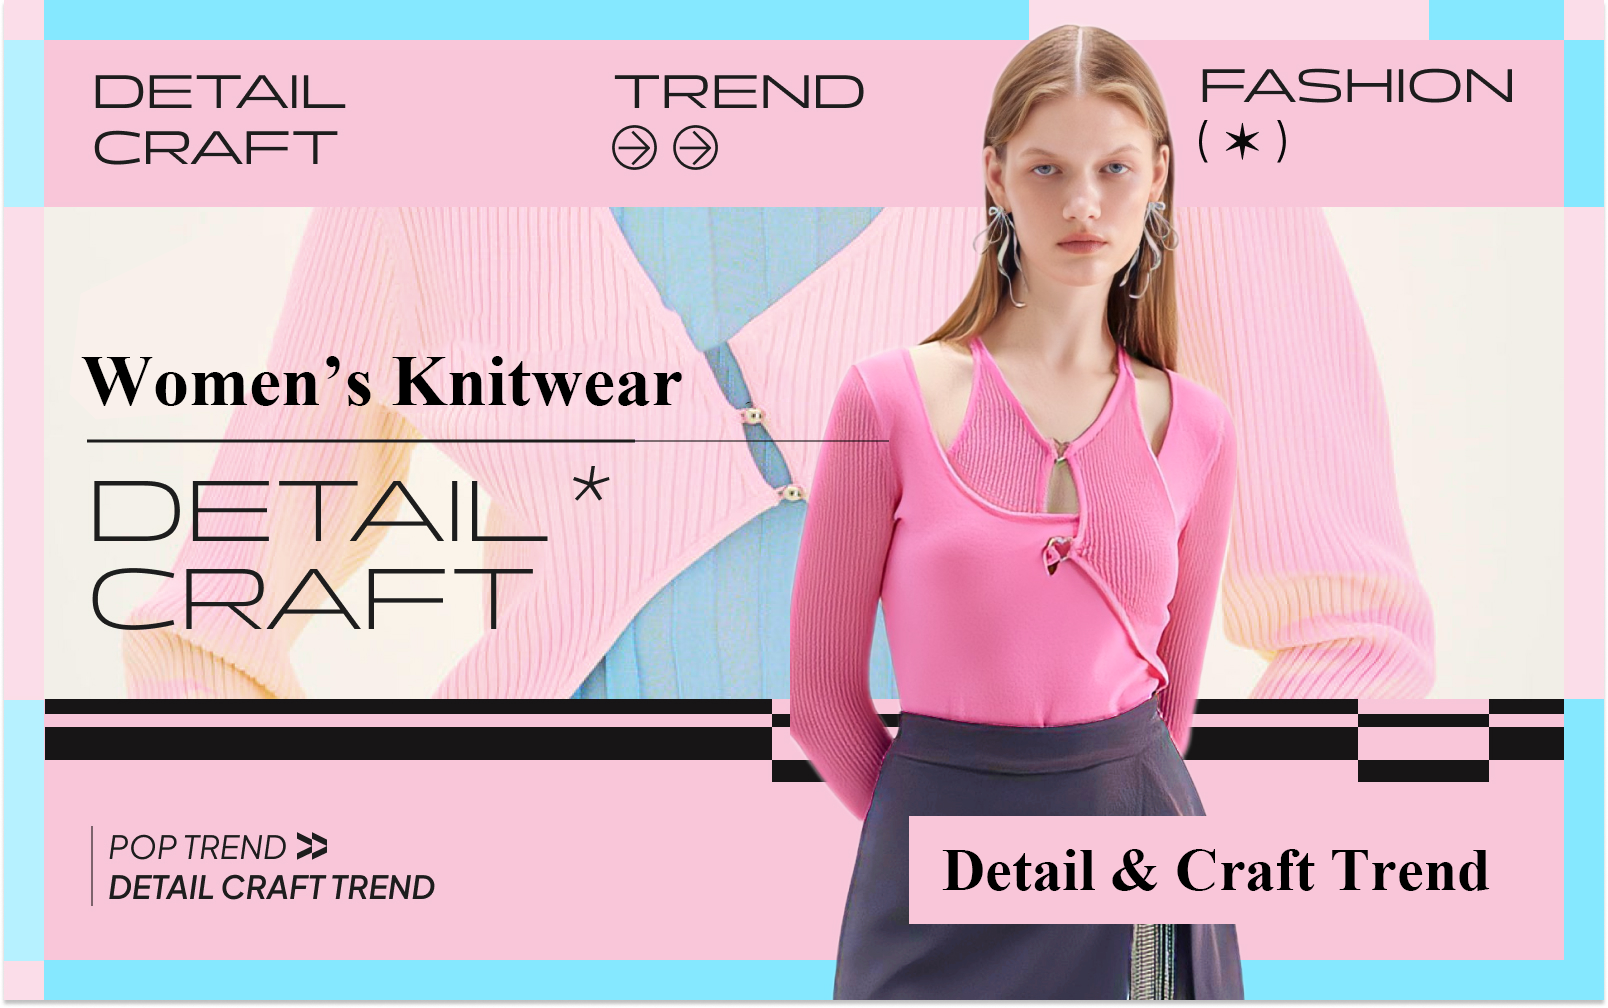 Sweet Ladies -- The Detail & Craft Trend for Women's Knitwear